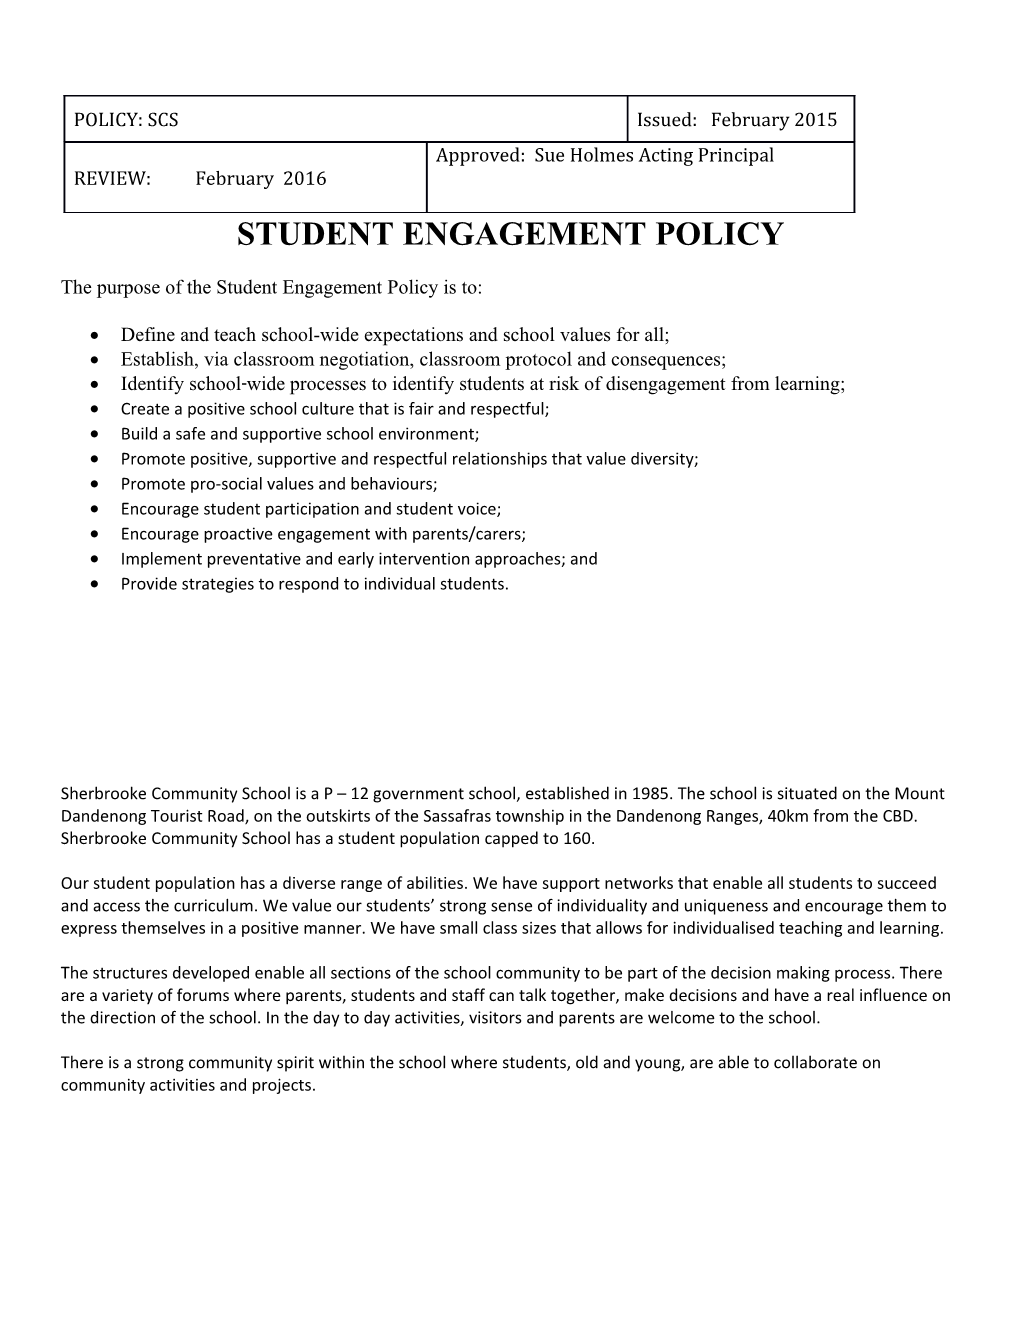 Student Engagement Policy